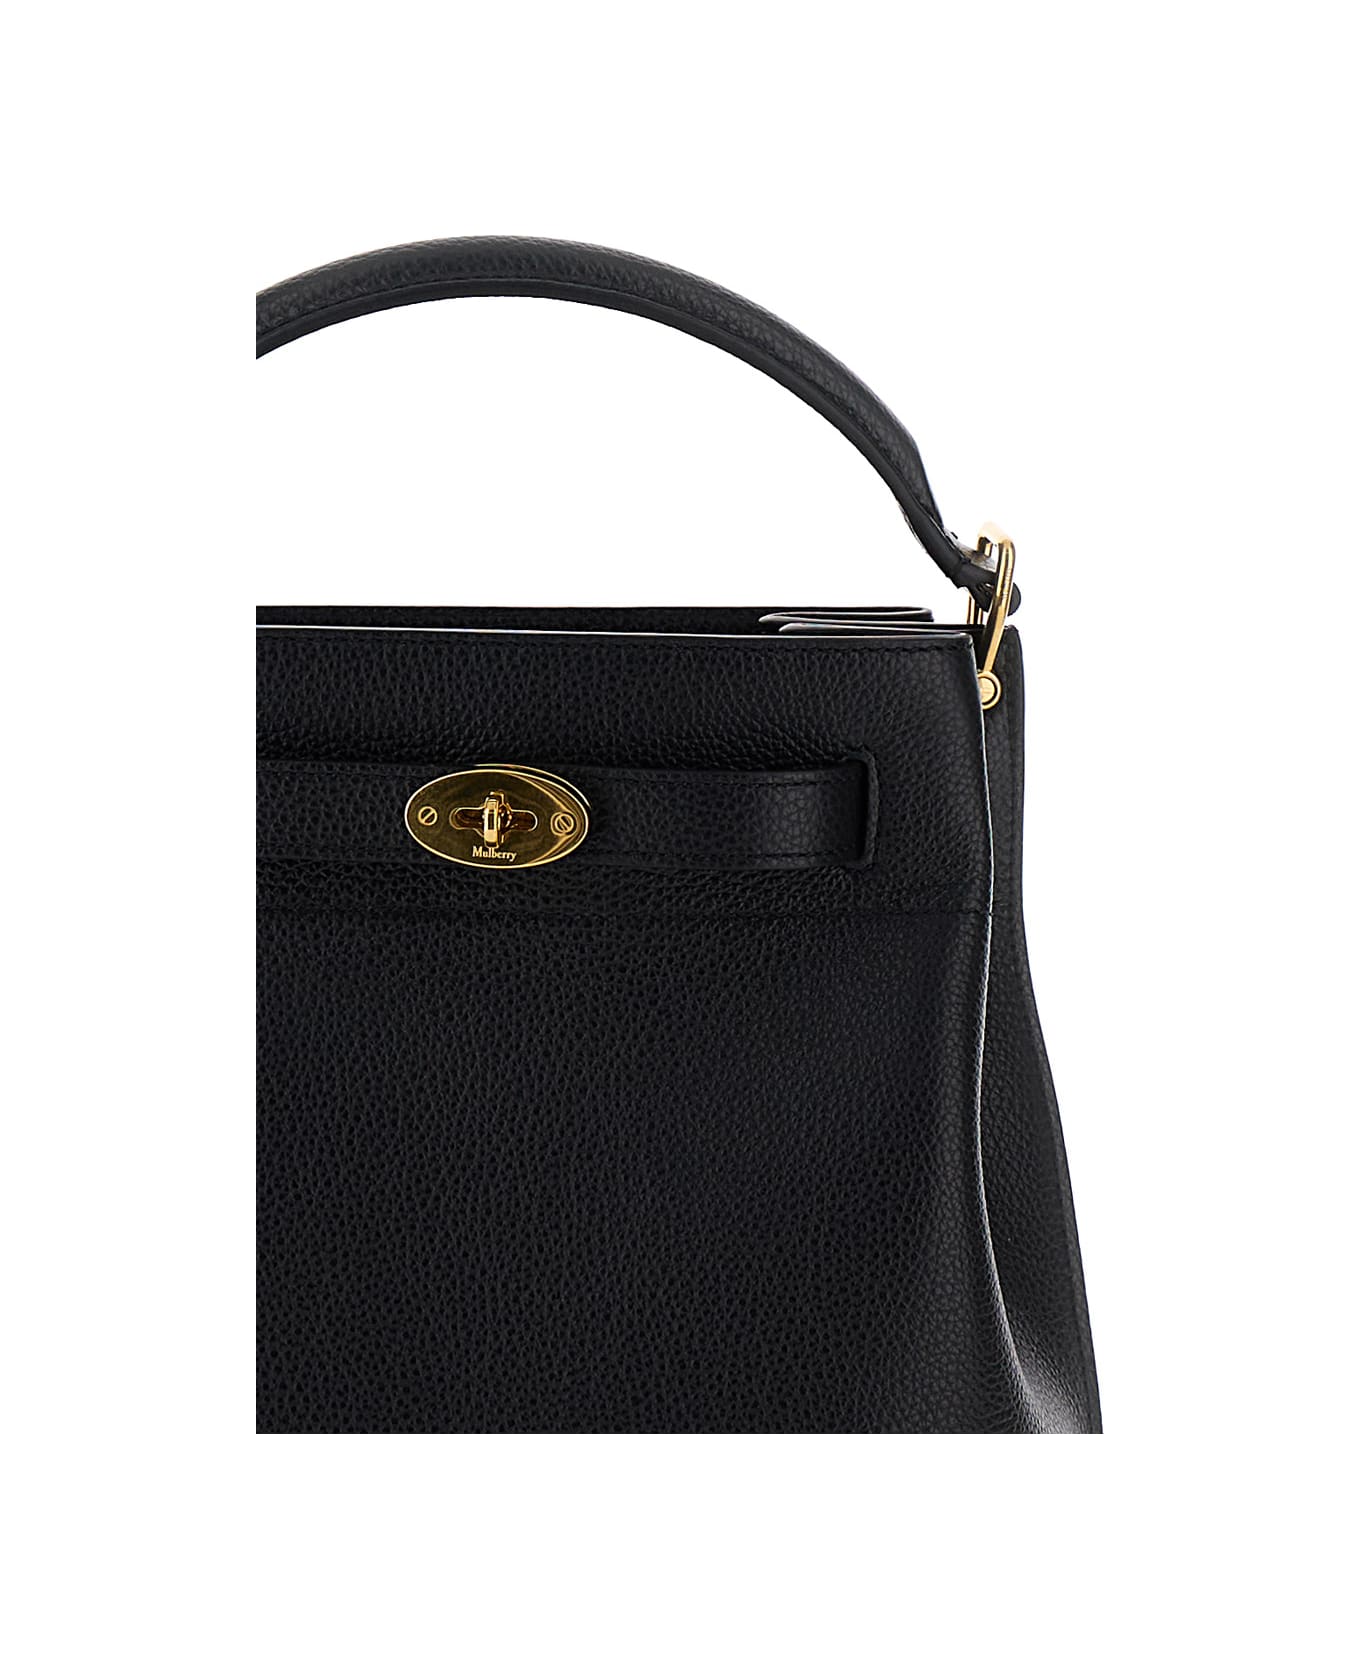 Mulberry 'small Islington' Black Bucket Bag With Twist Lock Closure In Hammered Leather Woman - Black